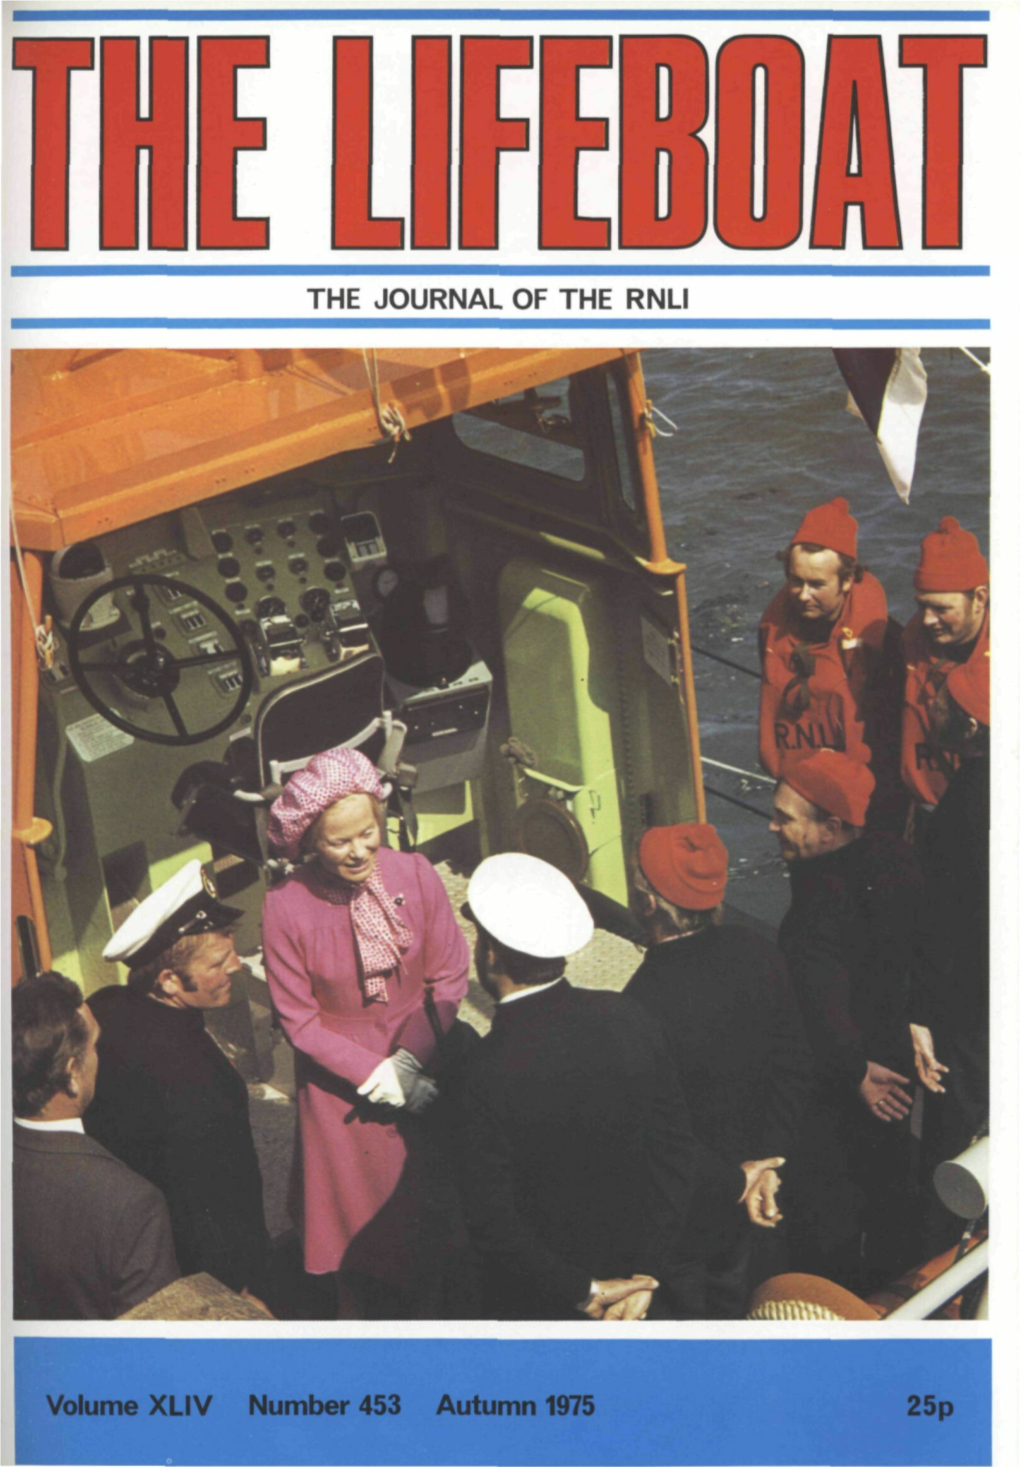 THE JOURNAL of the RNLI Volume XLIV Number 453 Autumn 1975